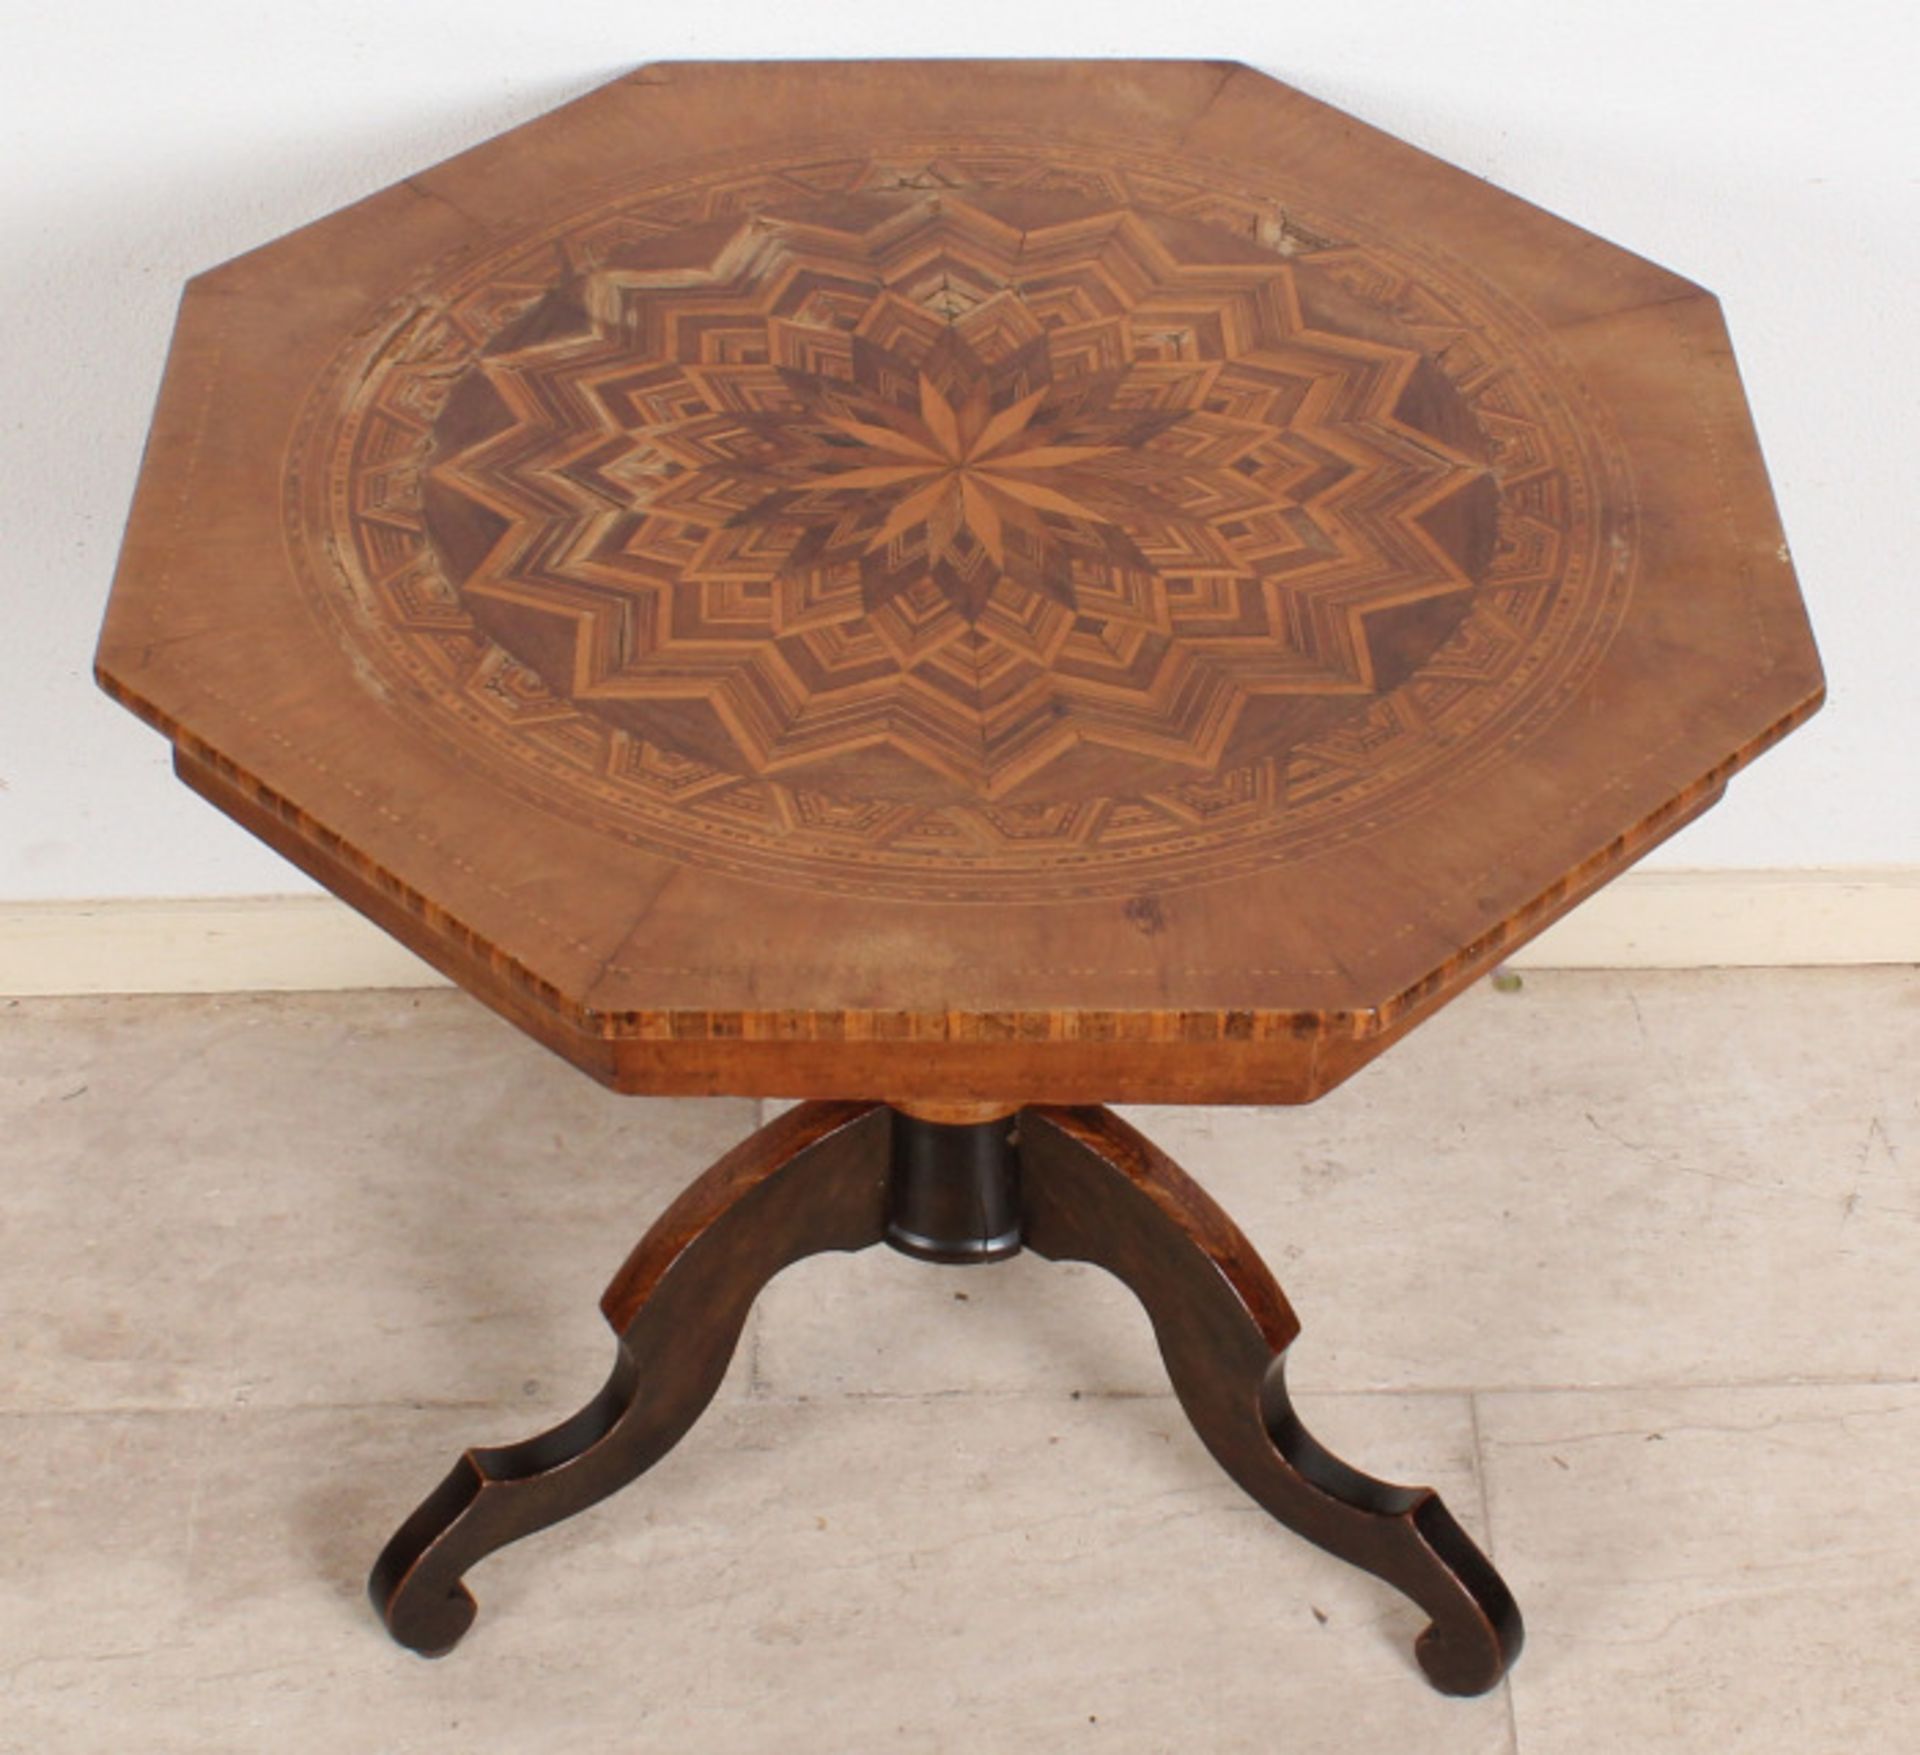 Nineteenth century table with marquetry, inlaid walnut on top and 3spant leg, around 1840, octagonal - Image 2 of 2